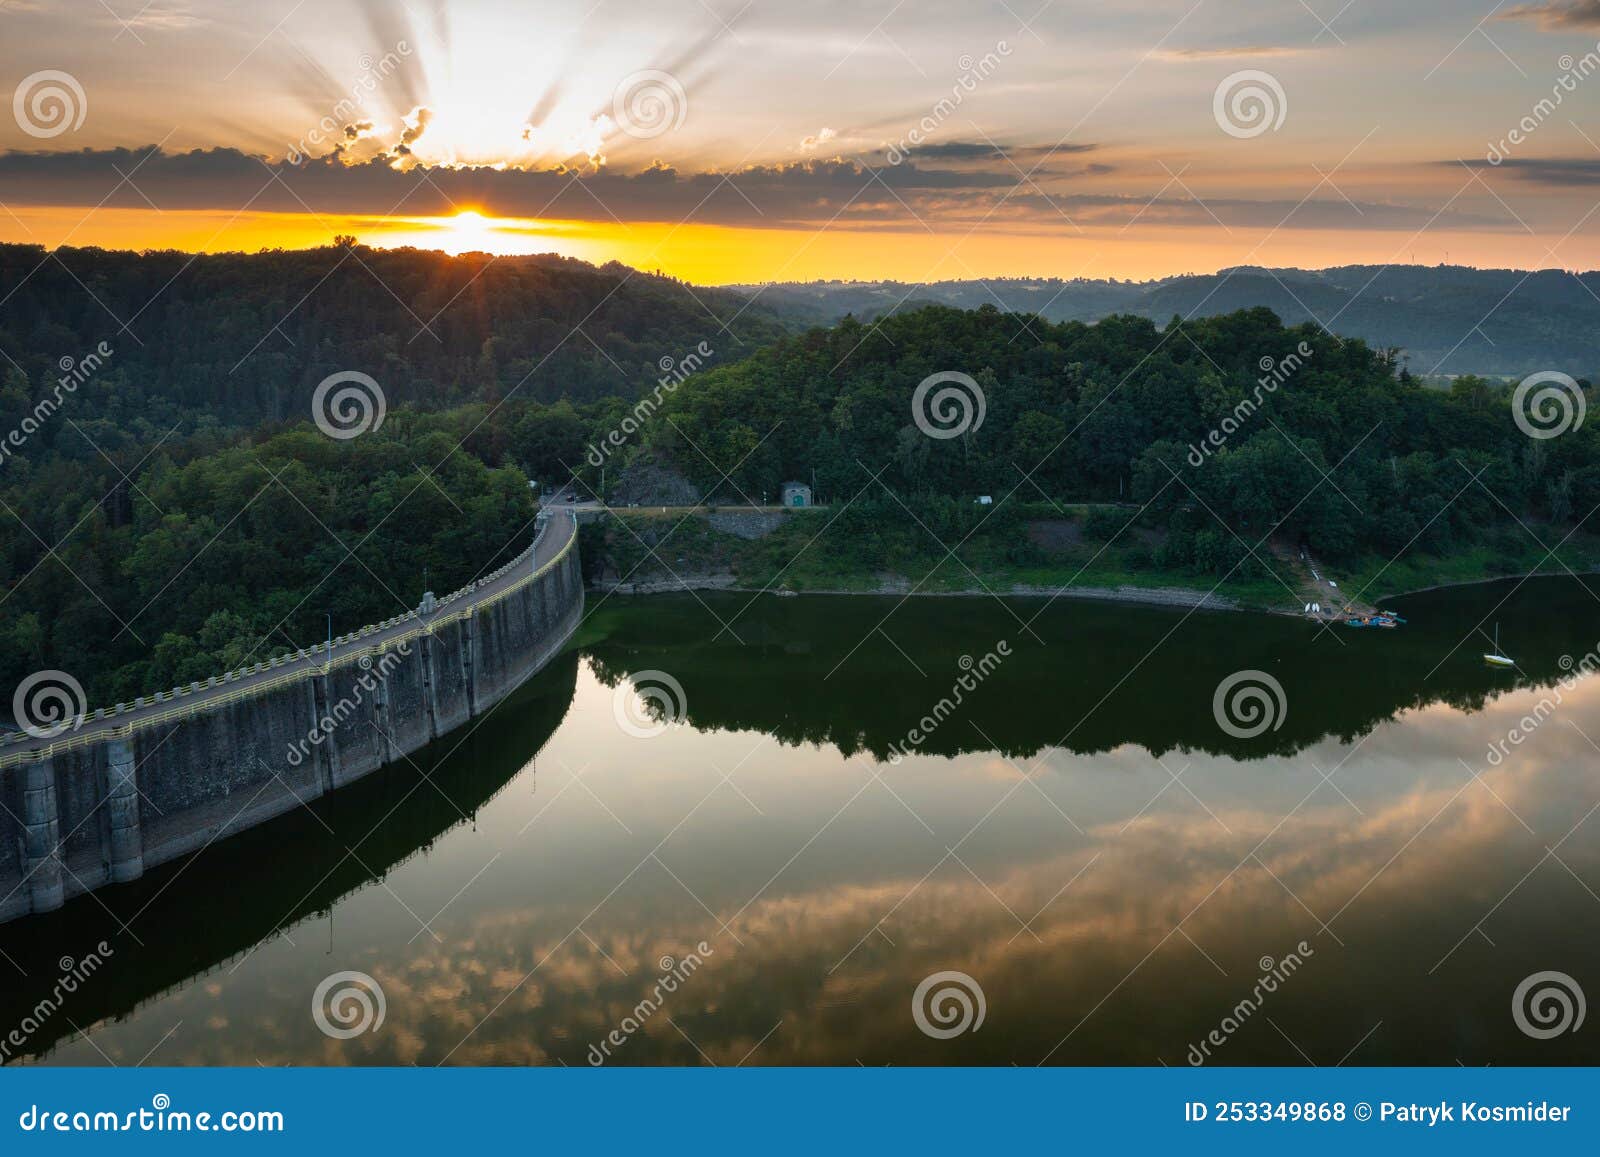 beautiful pilchowickie lake and the dam at sunset, lower silesia. poland